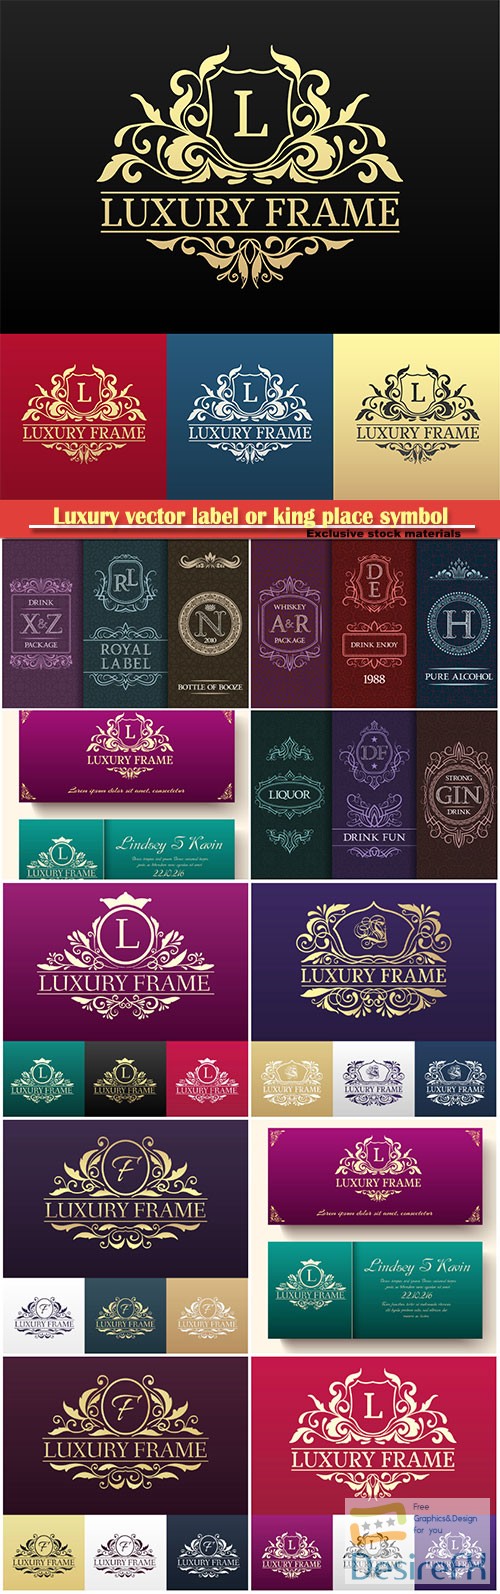 Luxury vector label or king place symbol element with decorative calligraphy object set